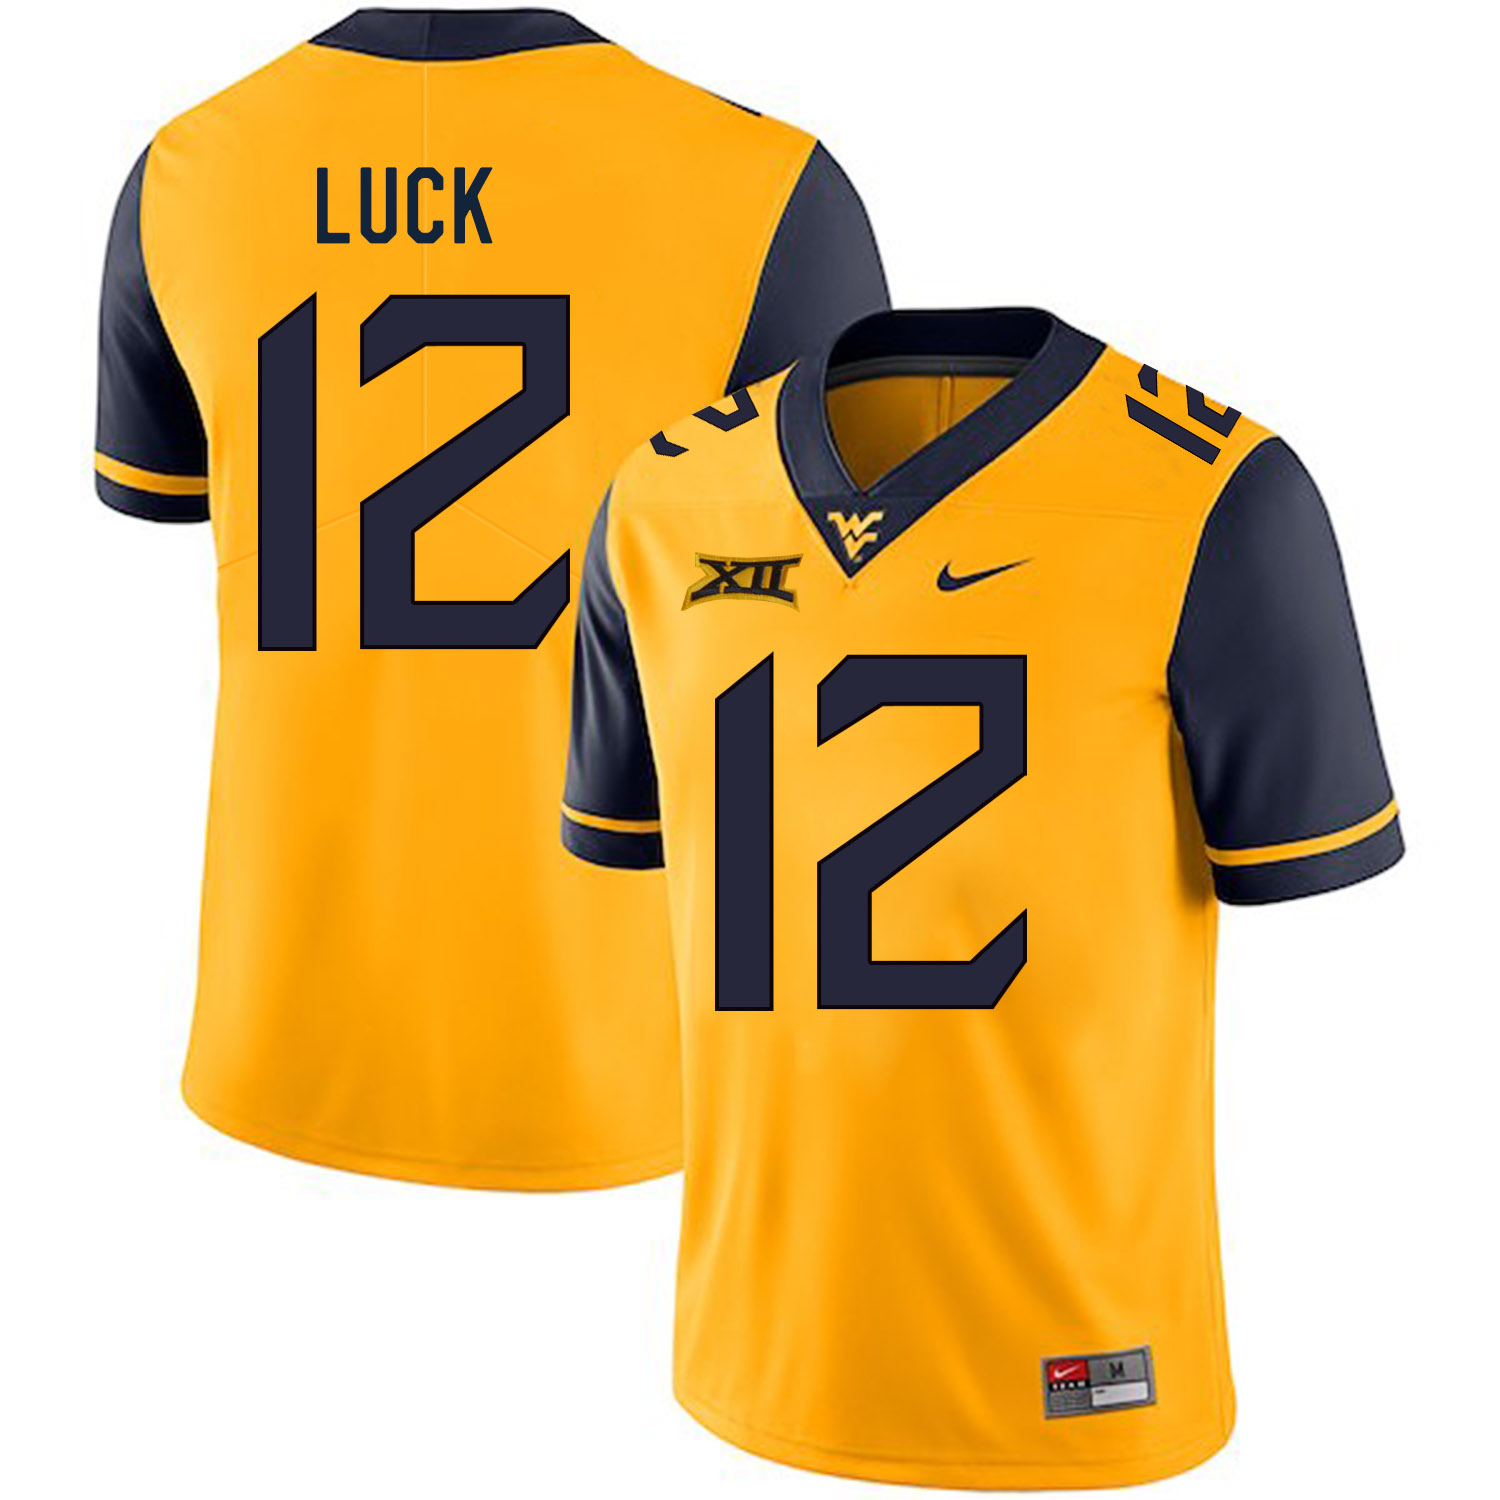 West Virginia Mountaineers 12 Oliver Luck Gold College Football Jersey